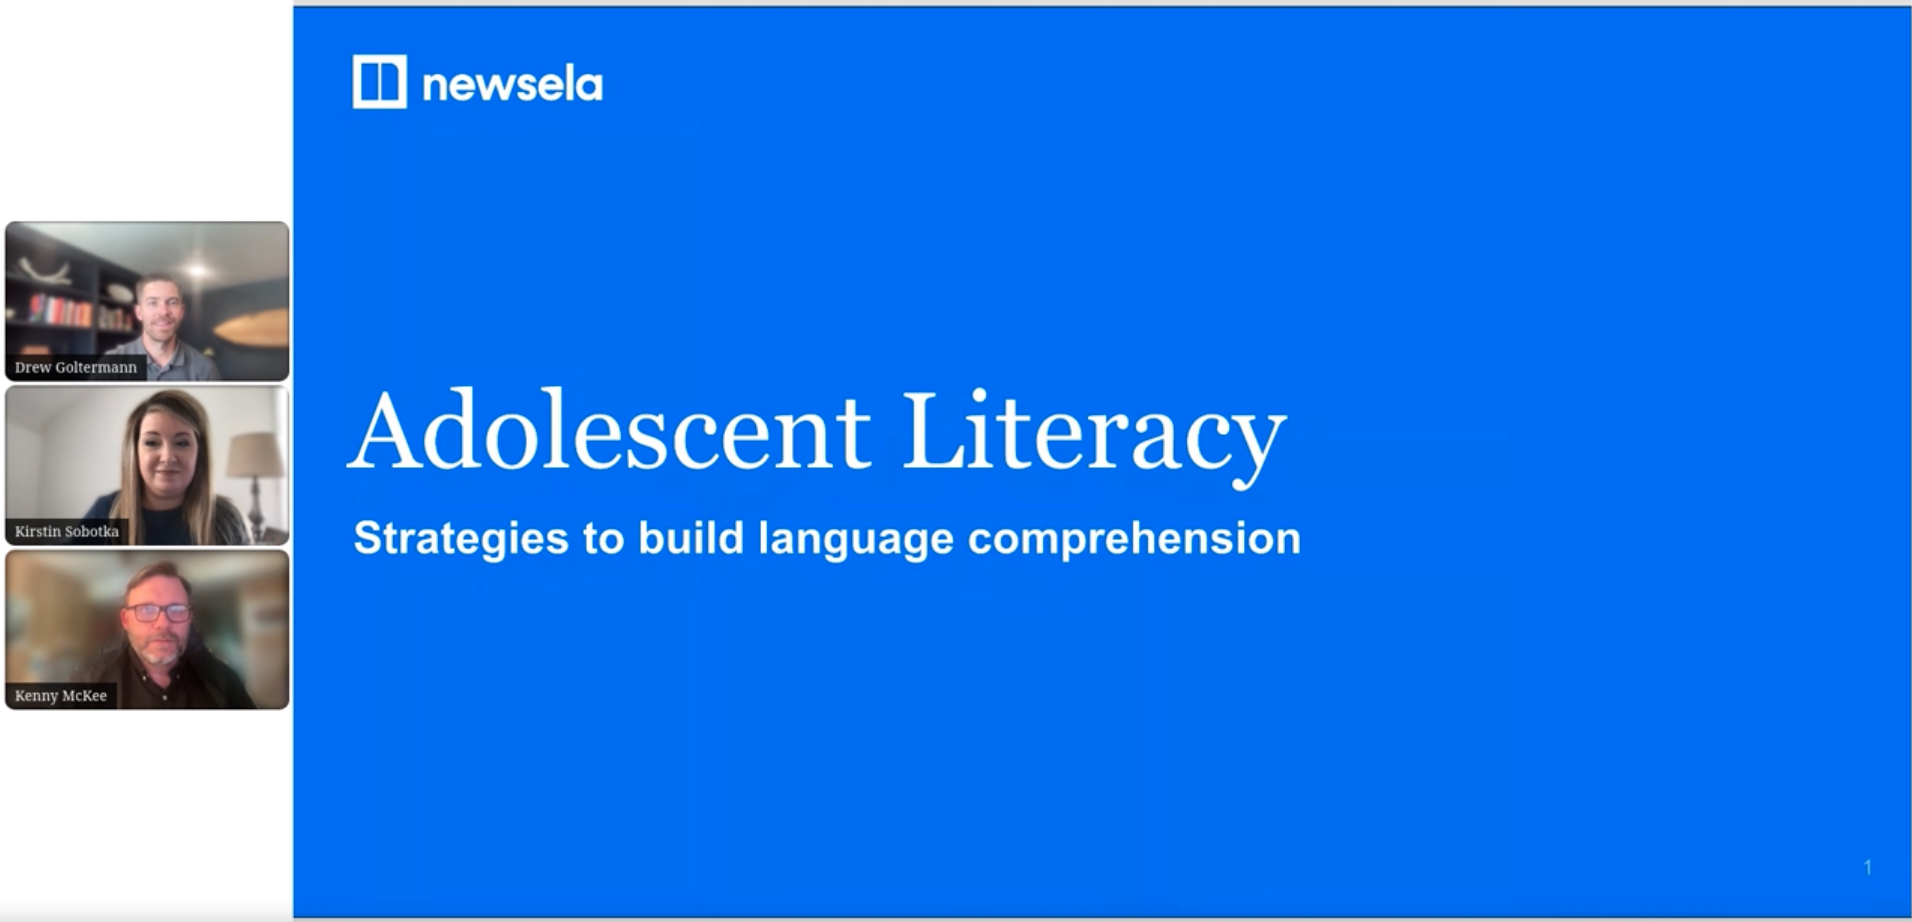 Adolescent Literacy with Newsela: Strategies to Build Knowledge and Language Comprehension